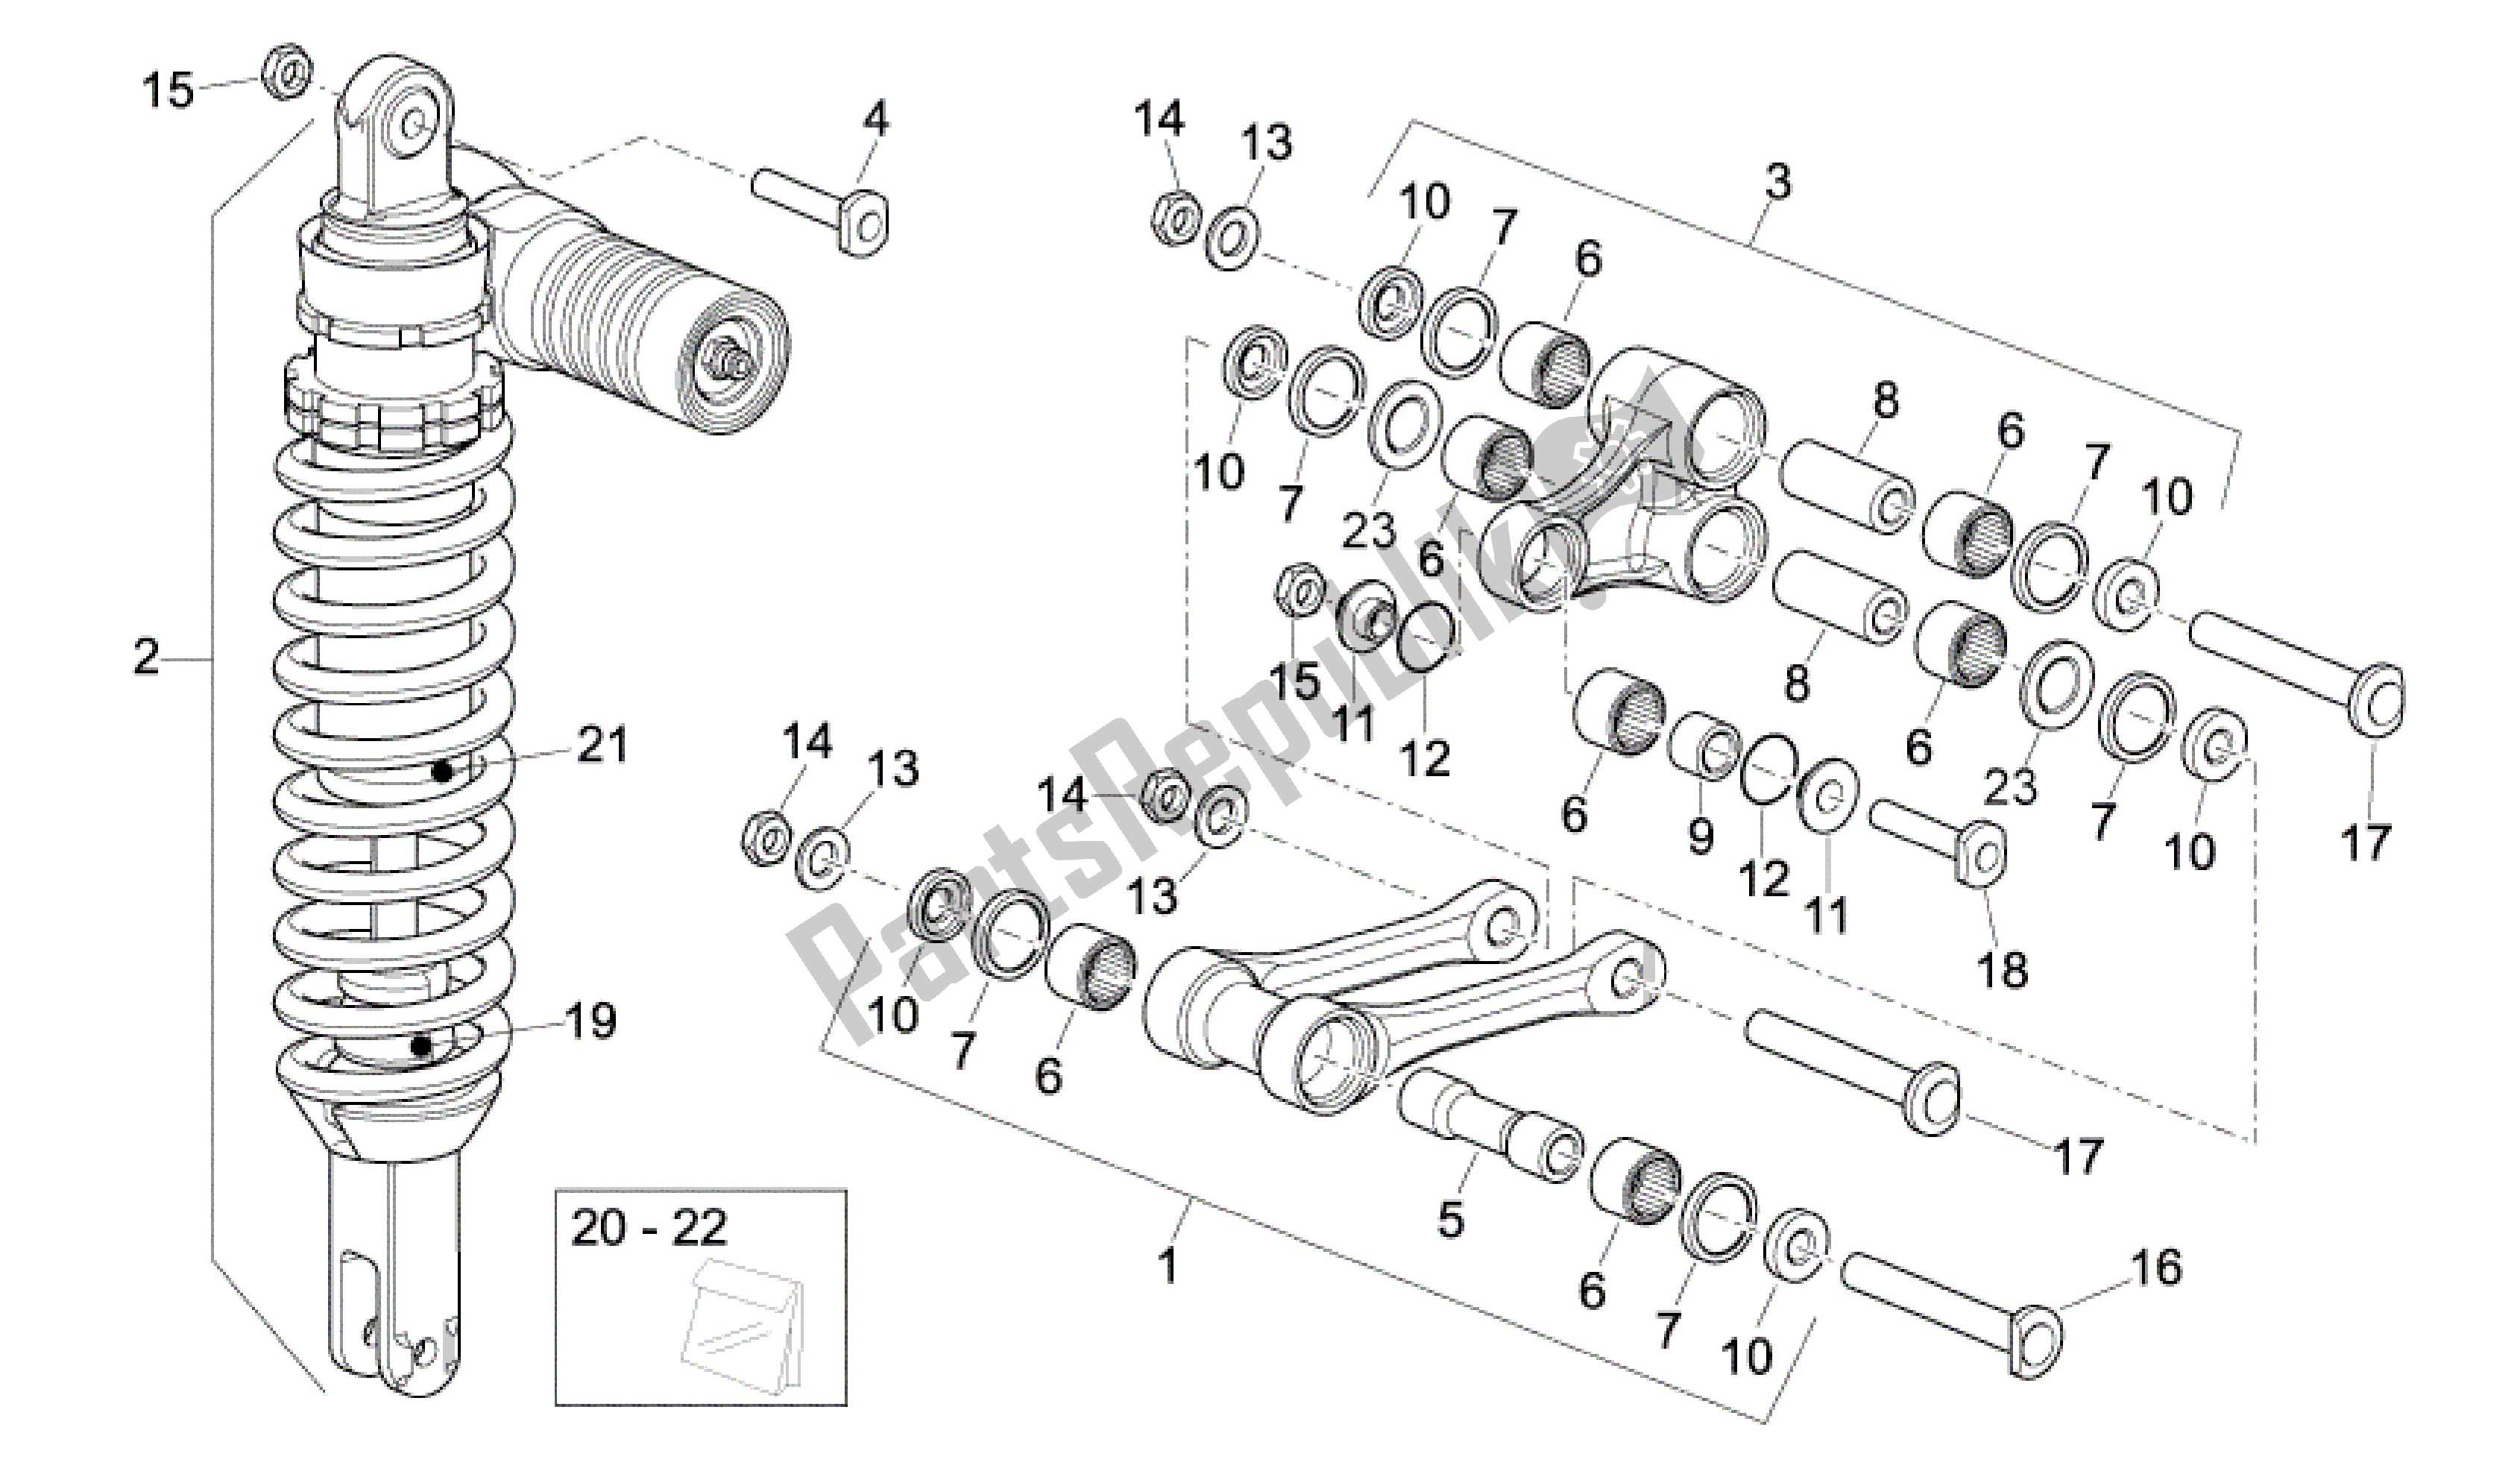 All parts for the Rear Shock Absorber of the Aprilia SXV 450 2009 - 2011